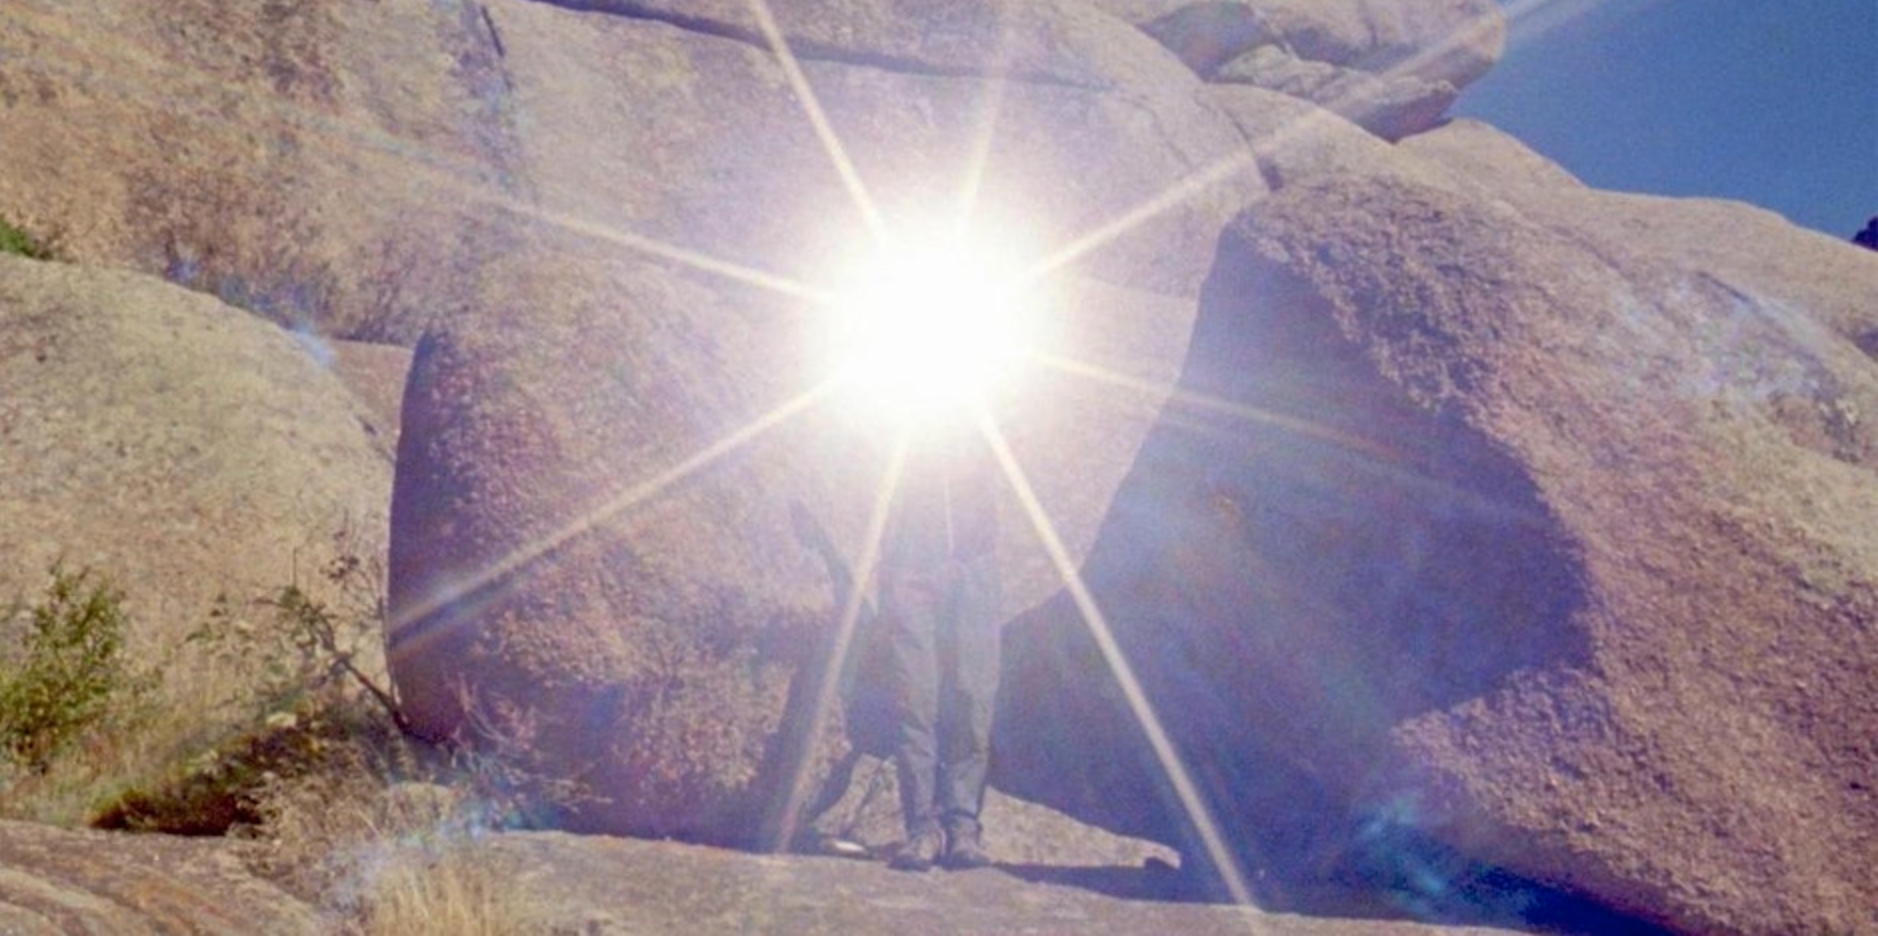 The image shows a﻿ person wearing grey trousers standing with their feet together in front of some very large sandstone rocks. There is a very bright light shining from in front of their face which covers the top half of their body and shines outwards in a star shape.